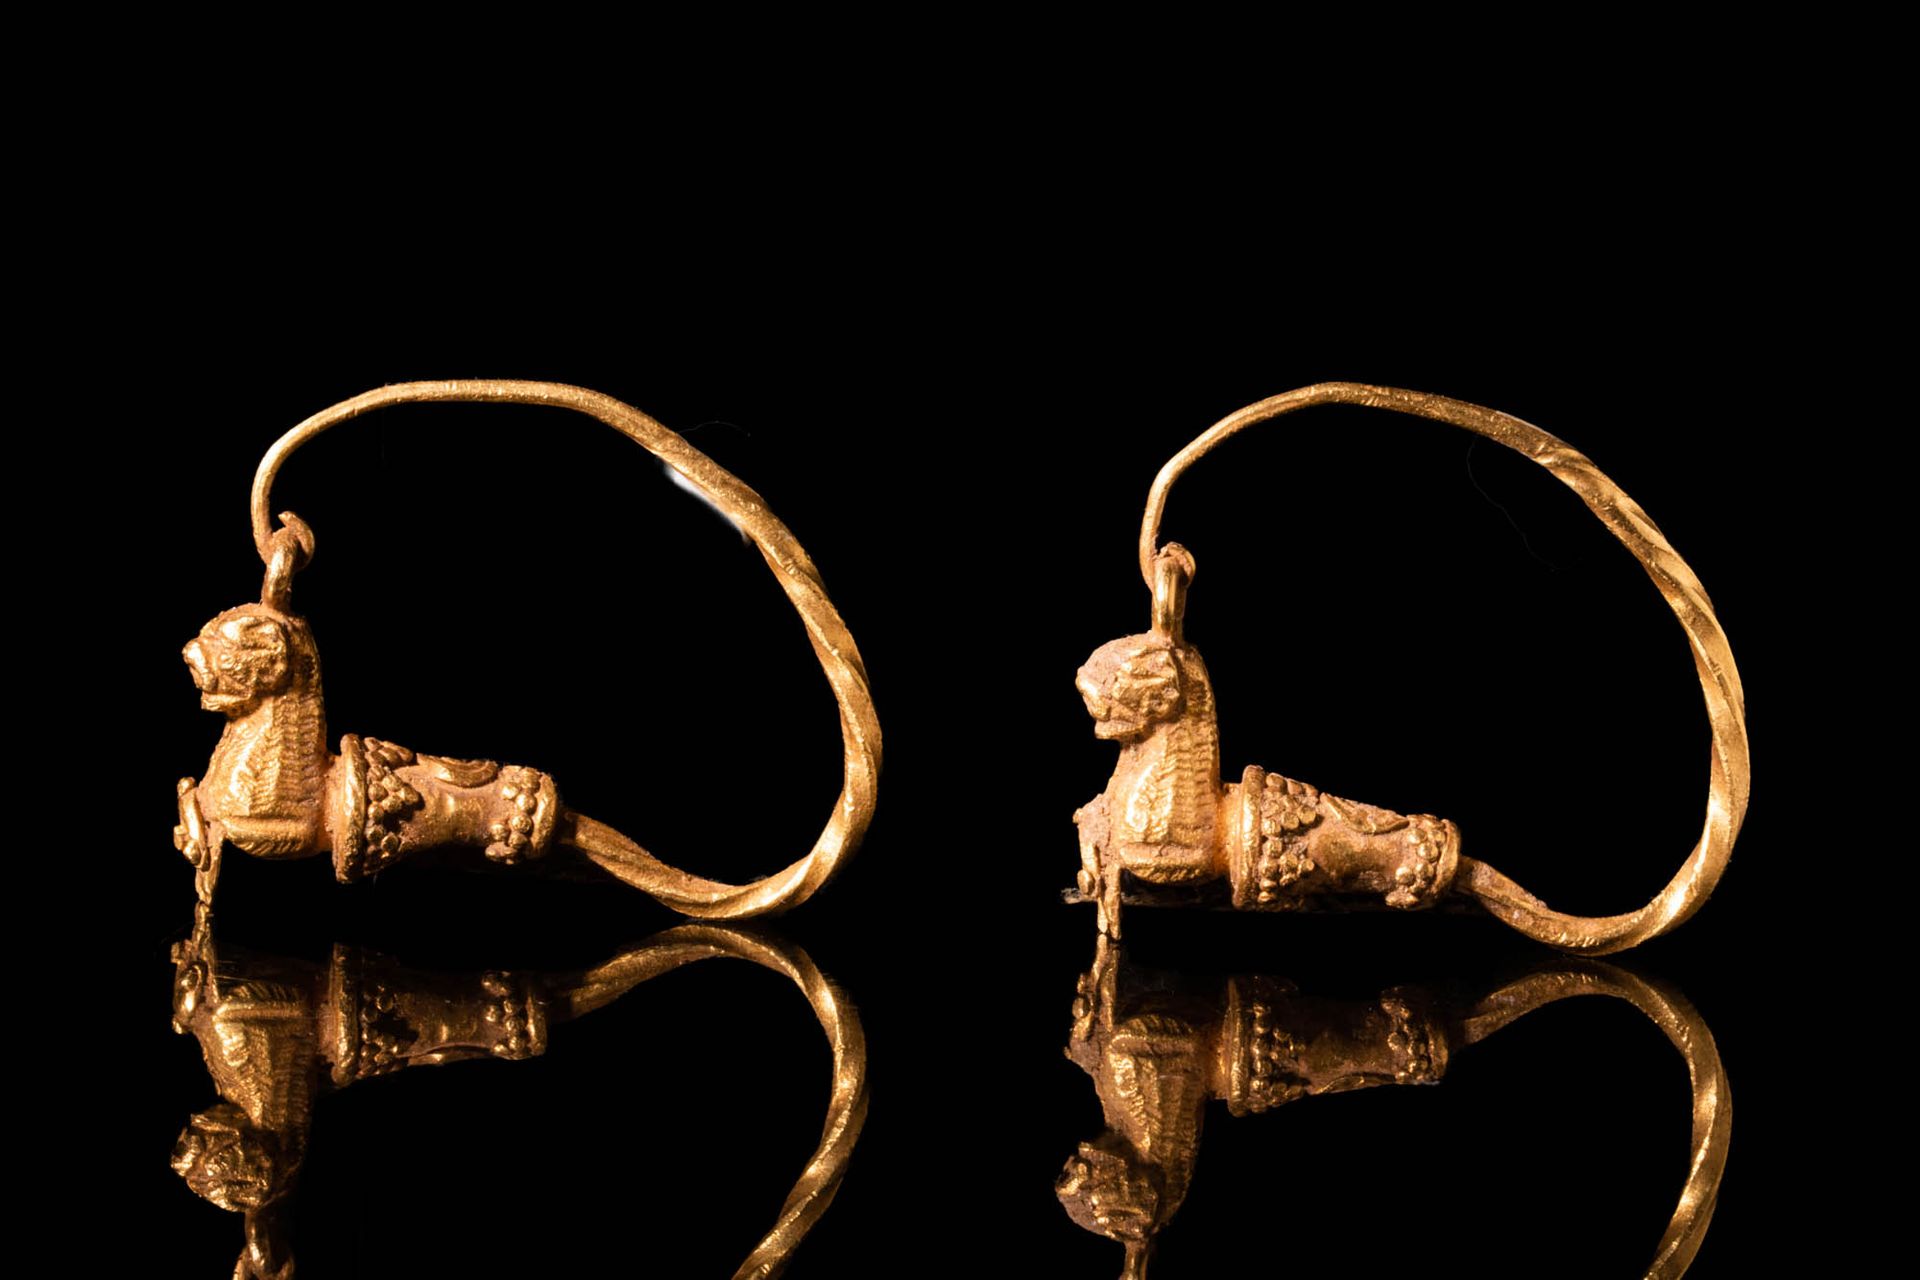 HELLENISTIC GOLD EARRINGS WITH ANIMAL PROTOMES Ca. 400-200 A.C.
Coppia di orecch&hellip;